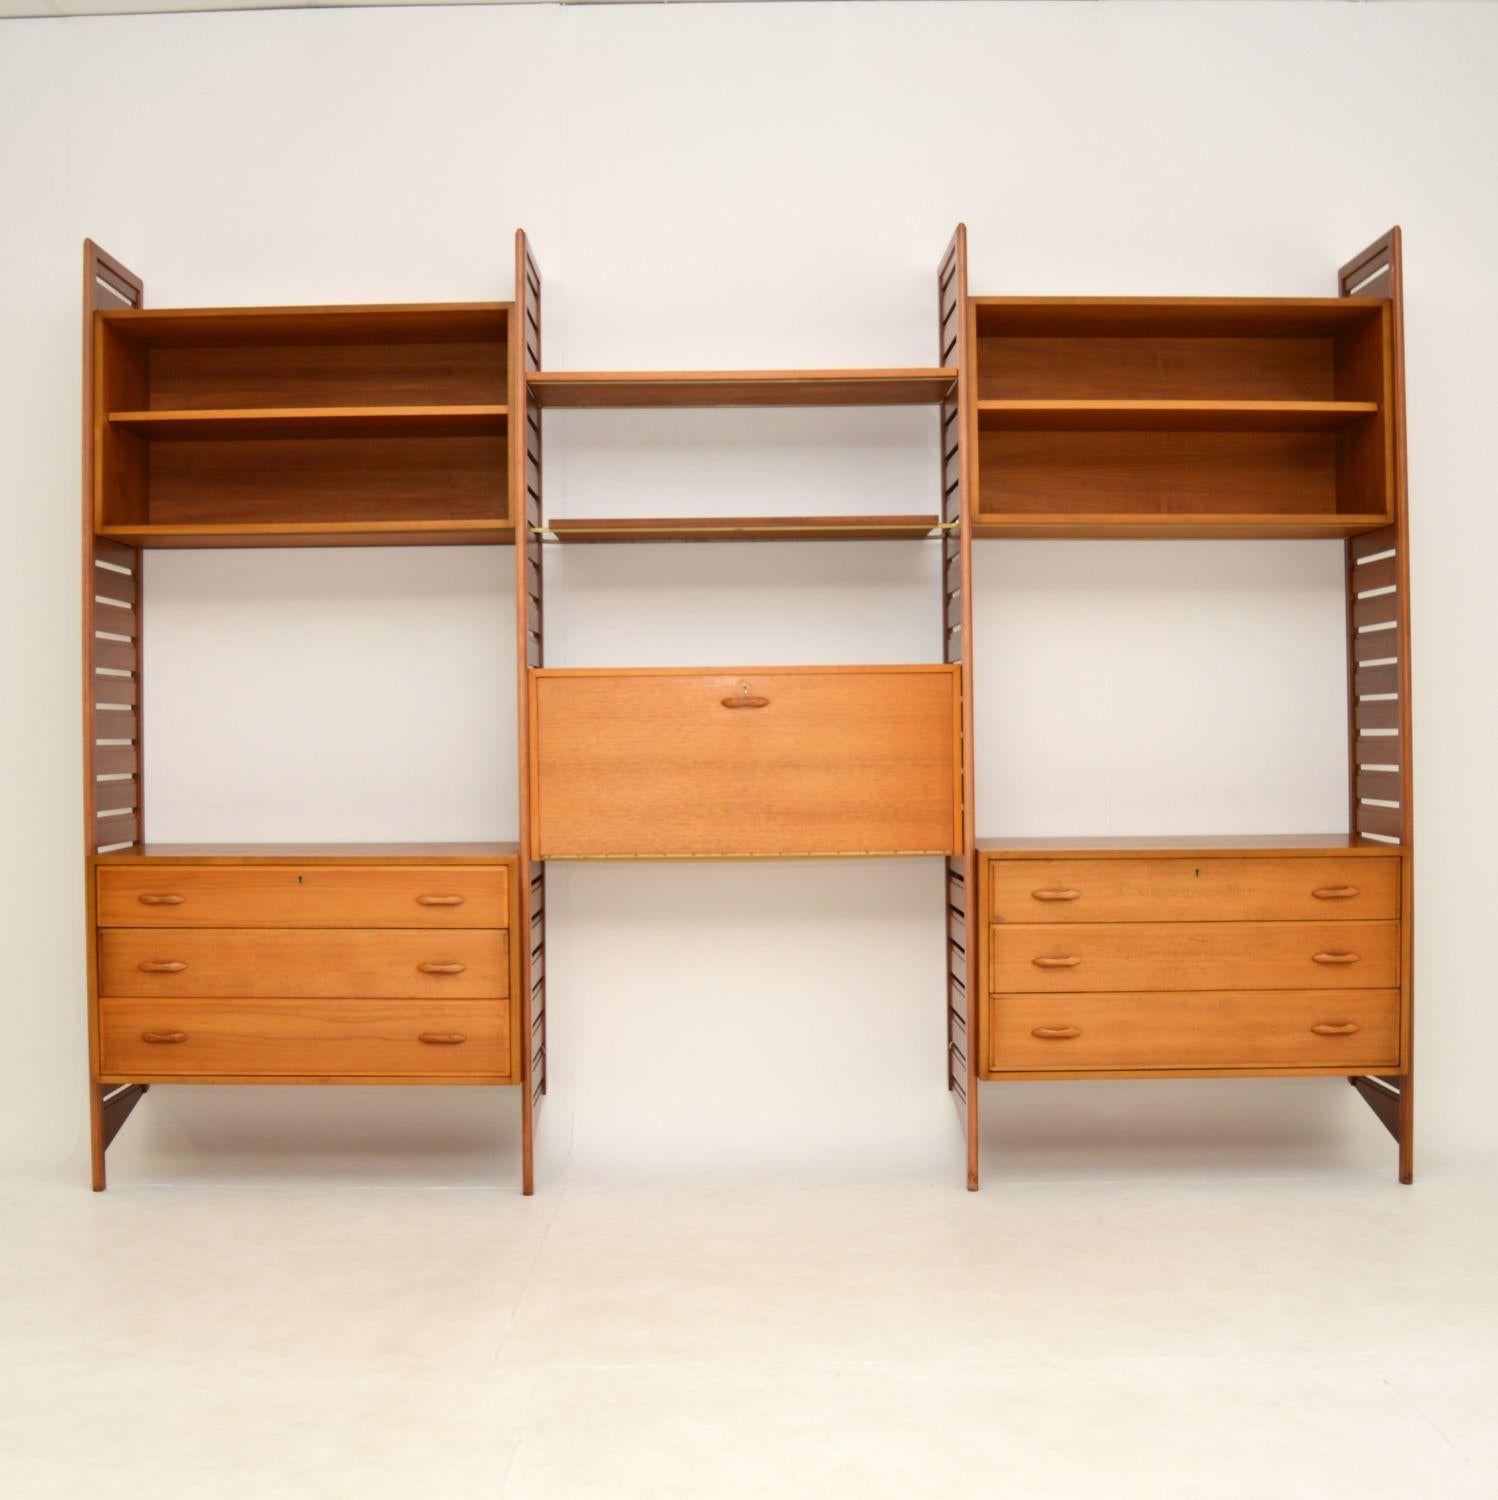 A wonderful Ladderax shelving system by Staples, this was made in England and dates from the 1960’s.

This set includes four tall ladder rails, two large chest of drawers, two open cabinets with adjustable shelves, a drop down writing bureau with